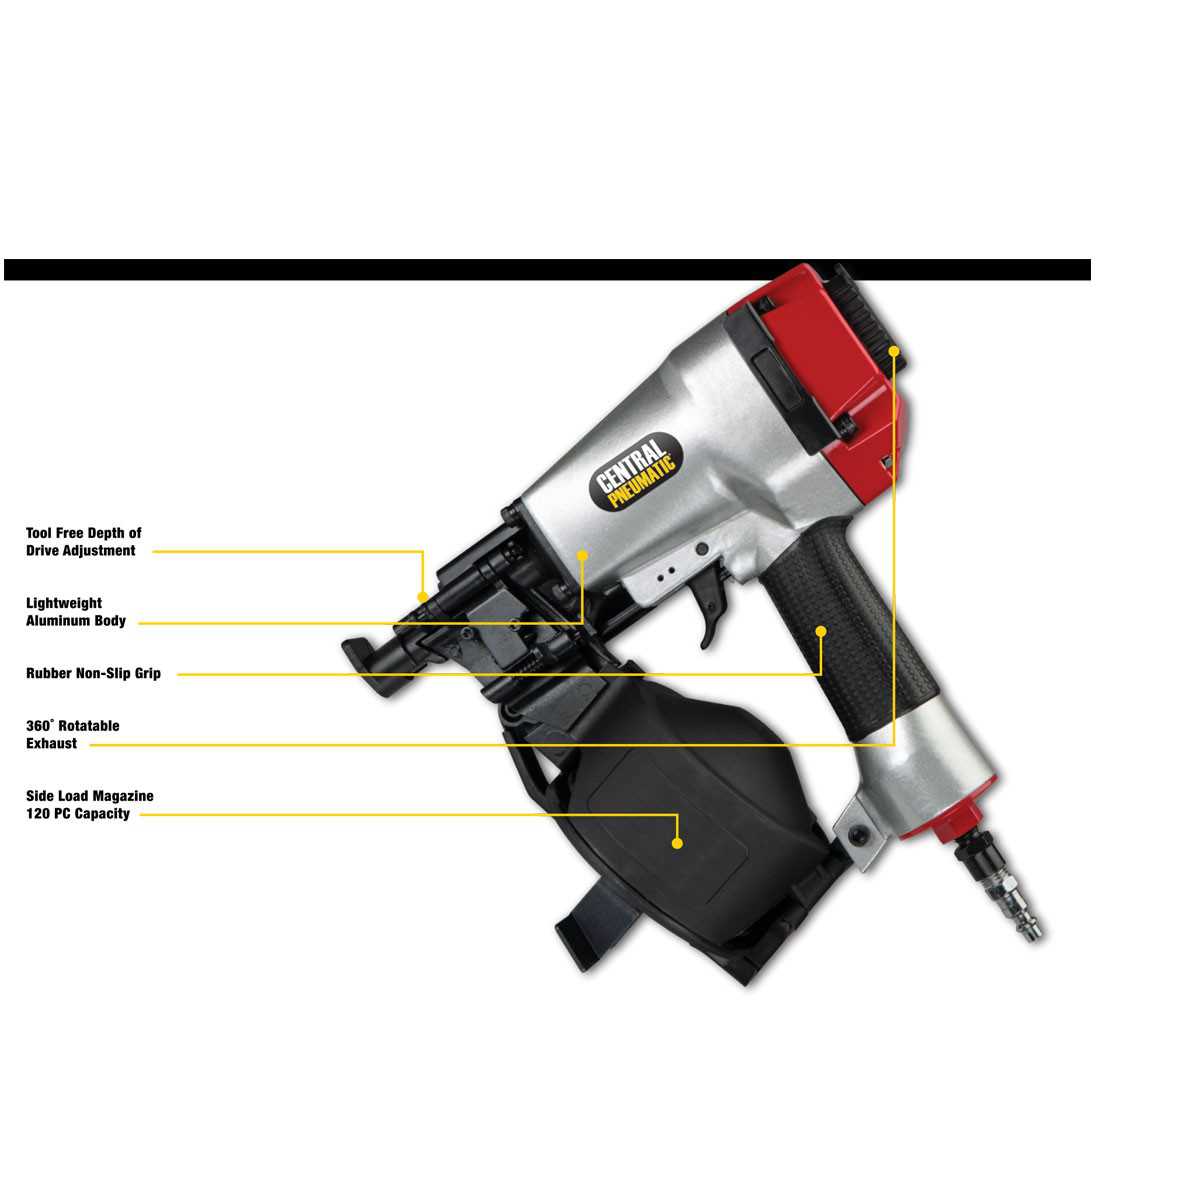 Central Pneumatic 11 Gauge Coil Roofing Air Nailer 2 CFM @ 90 PSI